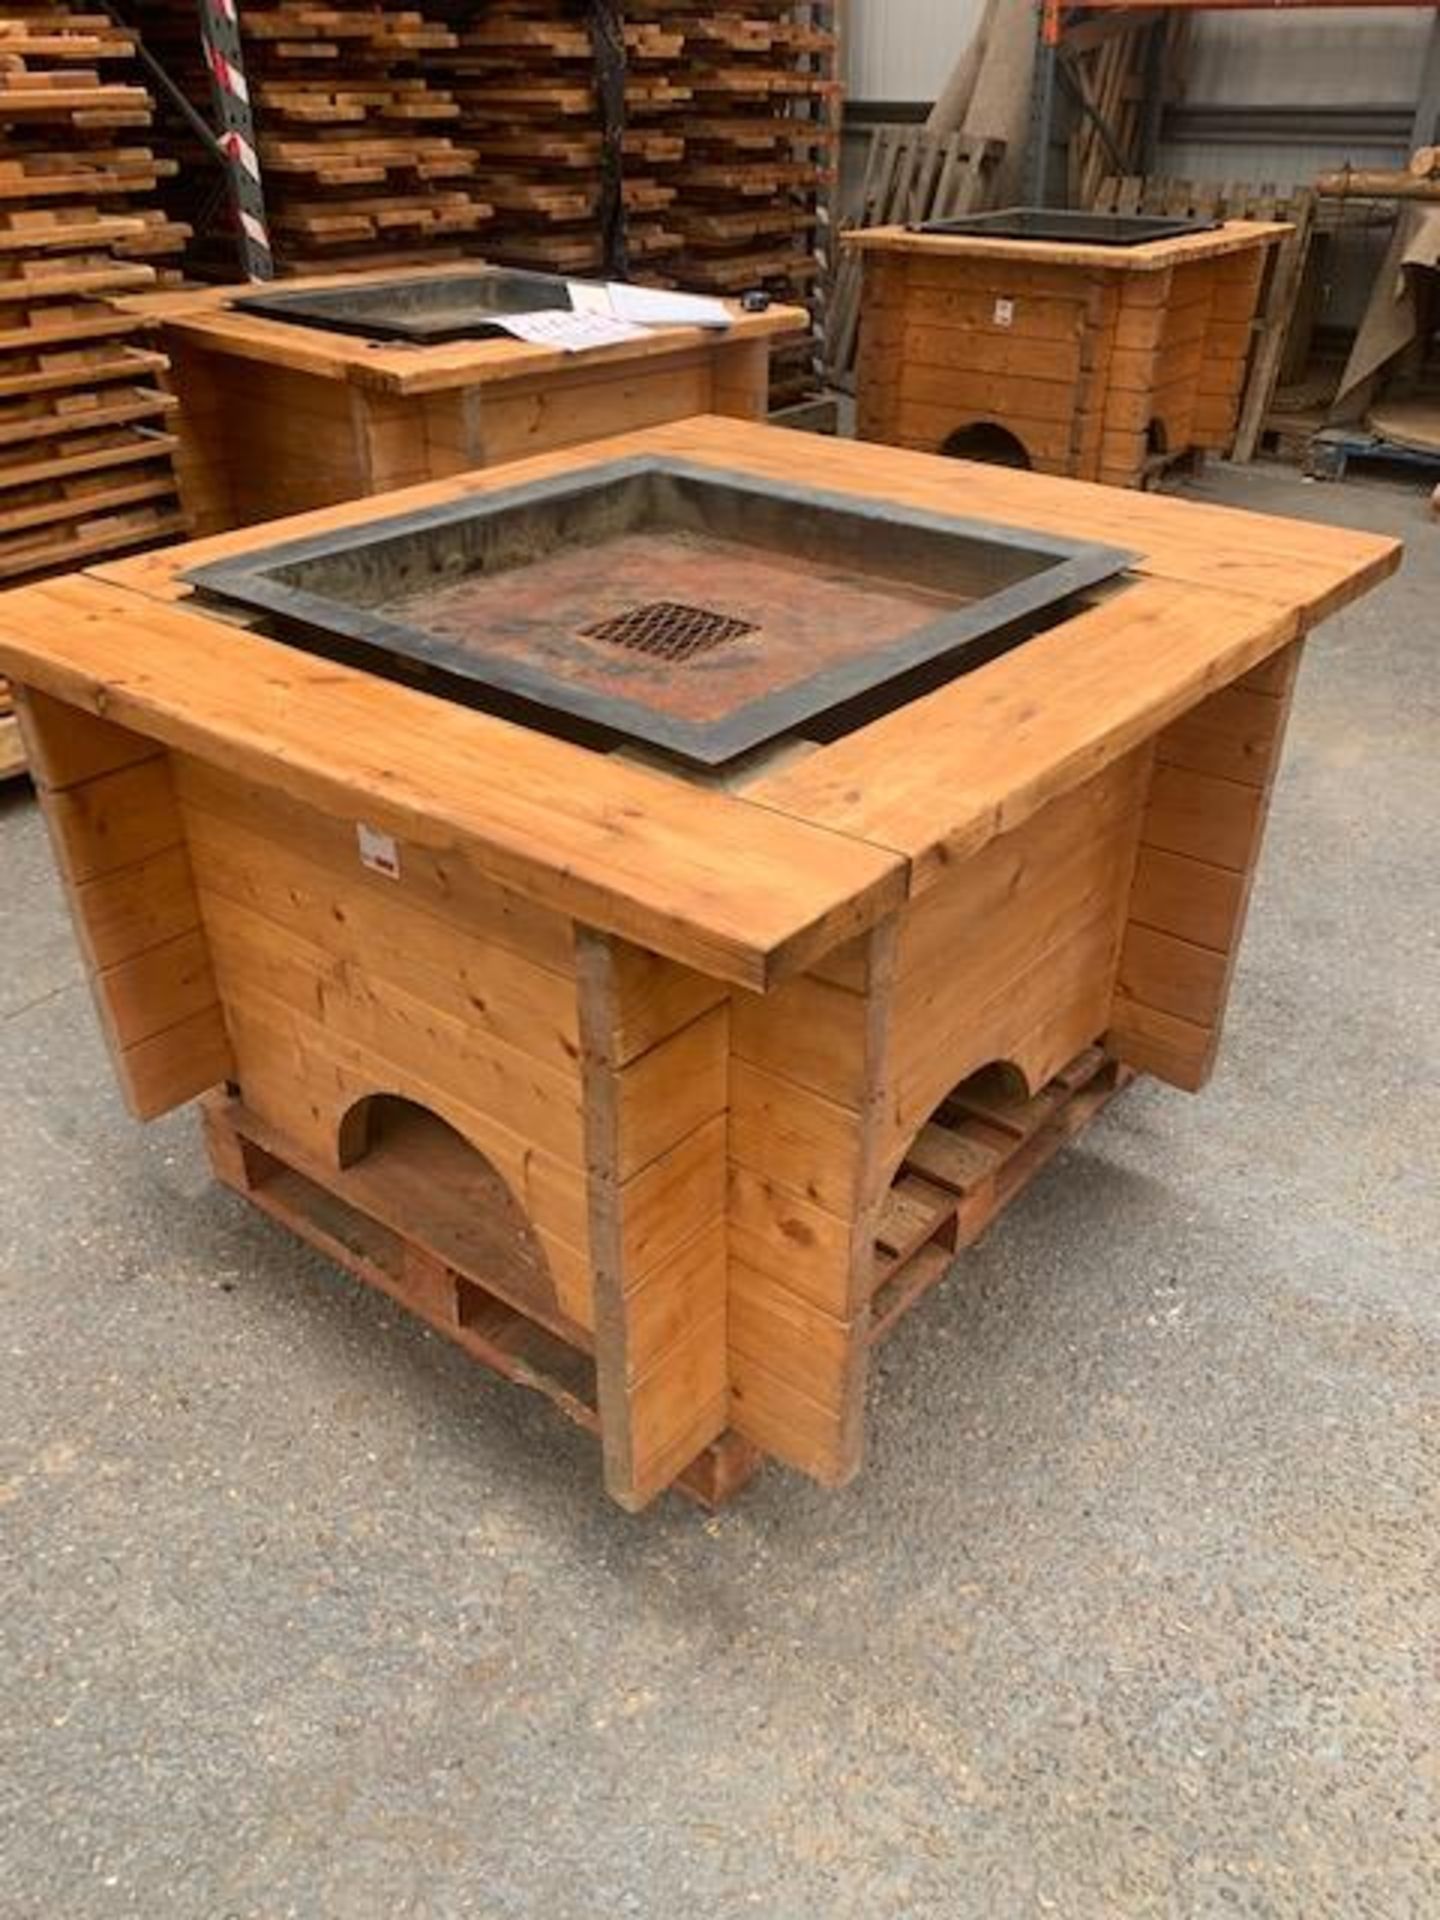 Solid Oak fire pit c/w ash collection tray L 1500mm W 1300mm H 760mm - Image 2 of 4